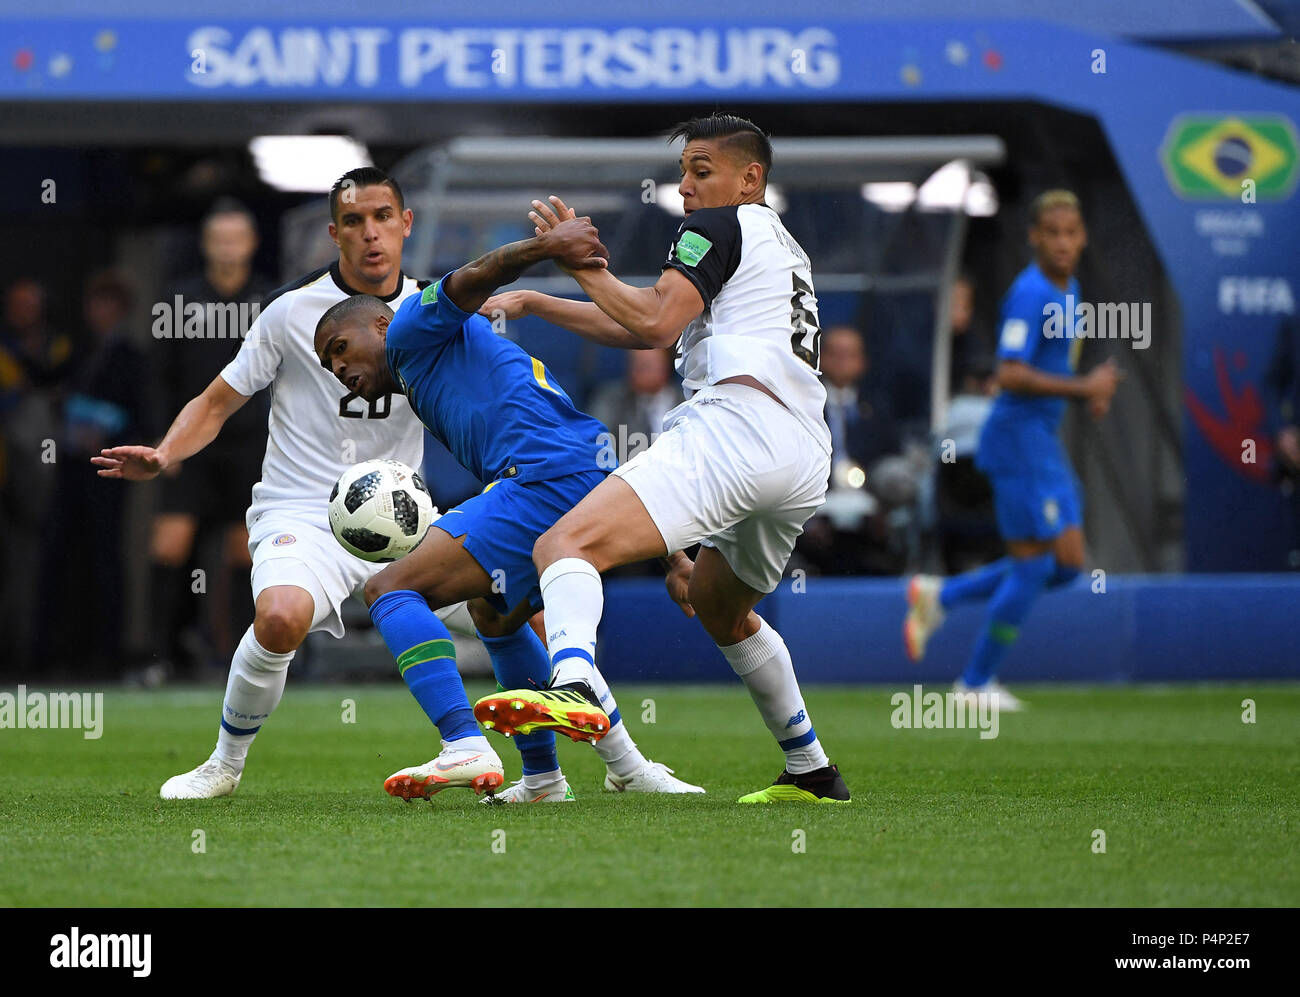 St. Petersburg, Russia. 22nd June, 2018. Russia, St. Petersburg, on June 22, 2018. 2018 FIFA World Cup Russia. The match of the group stage of the FIFA World Cup - 2018 between national teams of Brazil and Costa Rica. In the picture: the player of Brazil Douglas Costa and the player Costa - Ricky David Gusman, Oscar Duarte. Credit: Andrey Pronin/ZUMA Wire/Alamy Live News Stock Photo